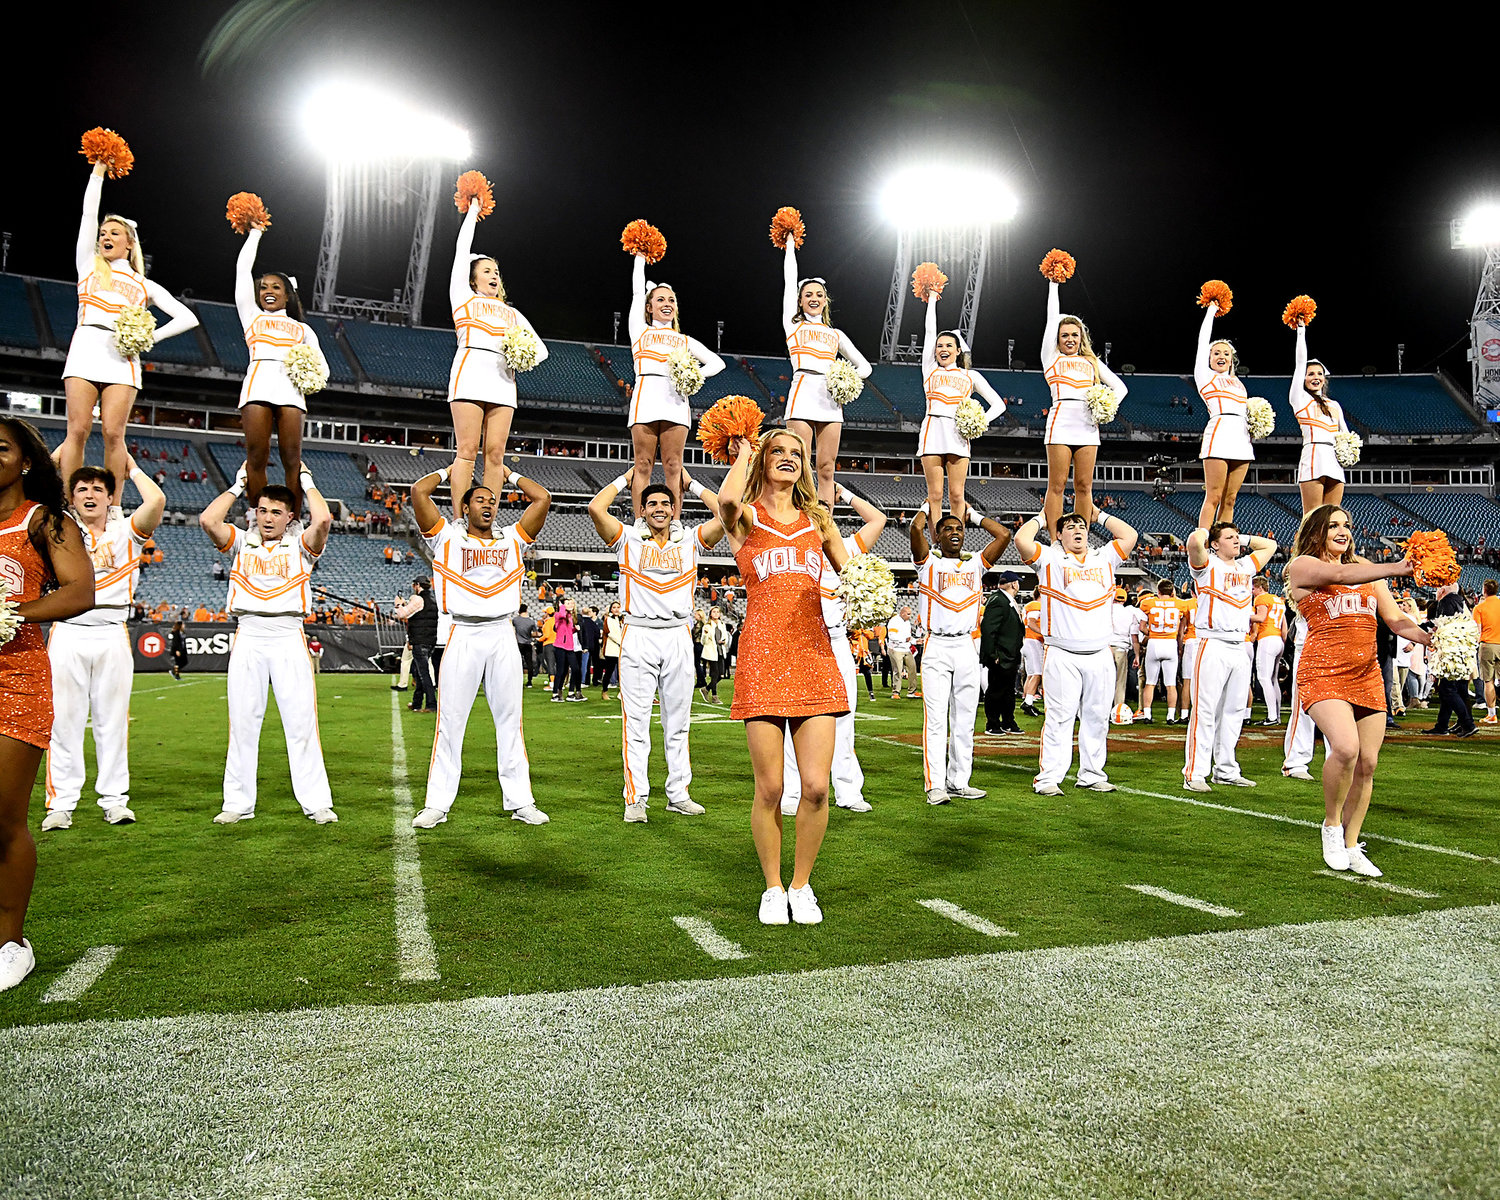 The Tennessee Volunteers cheerleaders celebrate the Vols' win over the Indiana Hoosiers at the Gator Bowl Thursday, January 2, 2020, at TIAA Bank Field in Jacksonville, Fla.